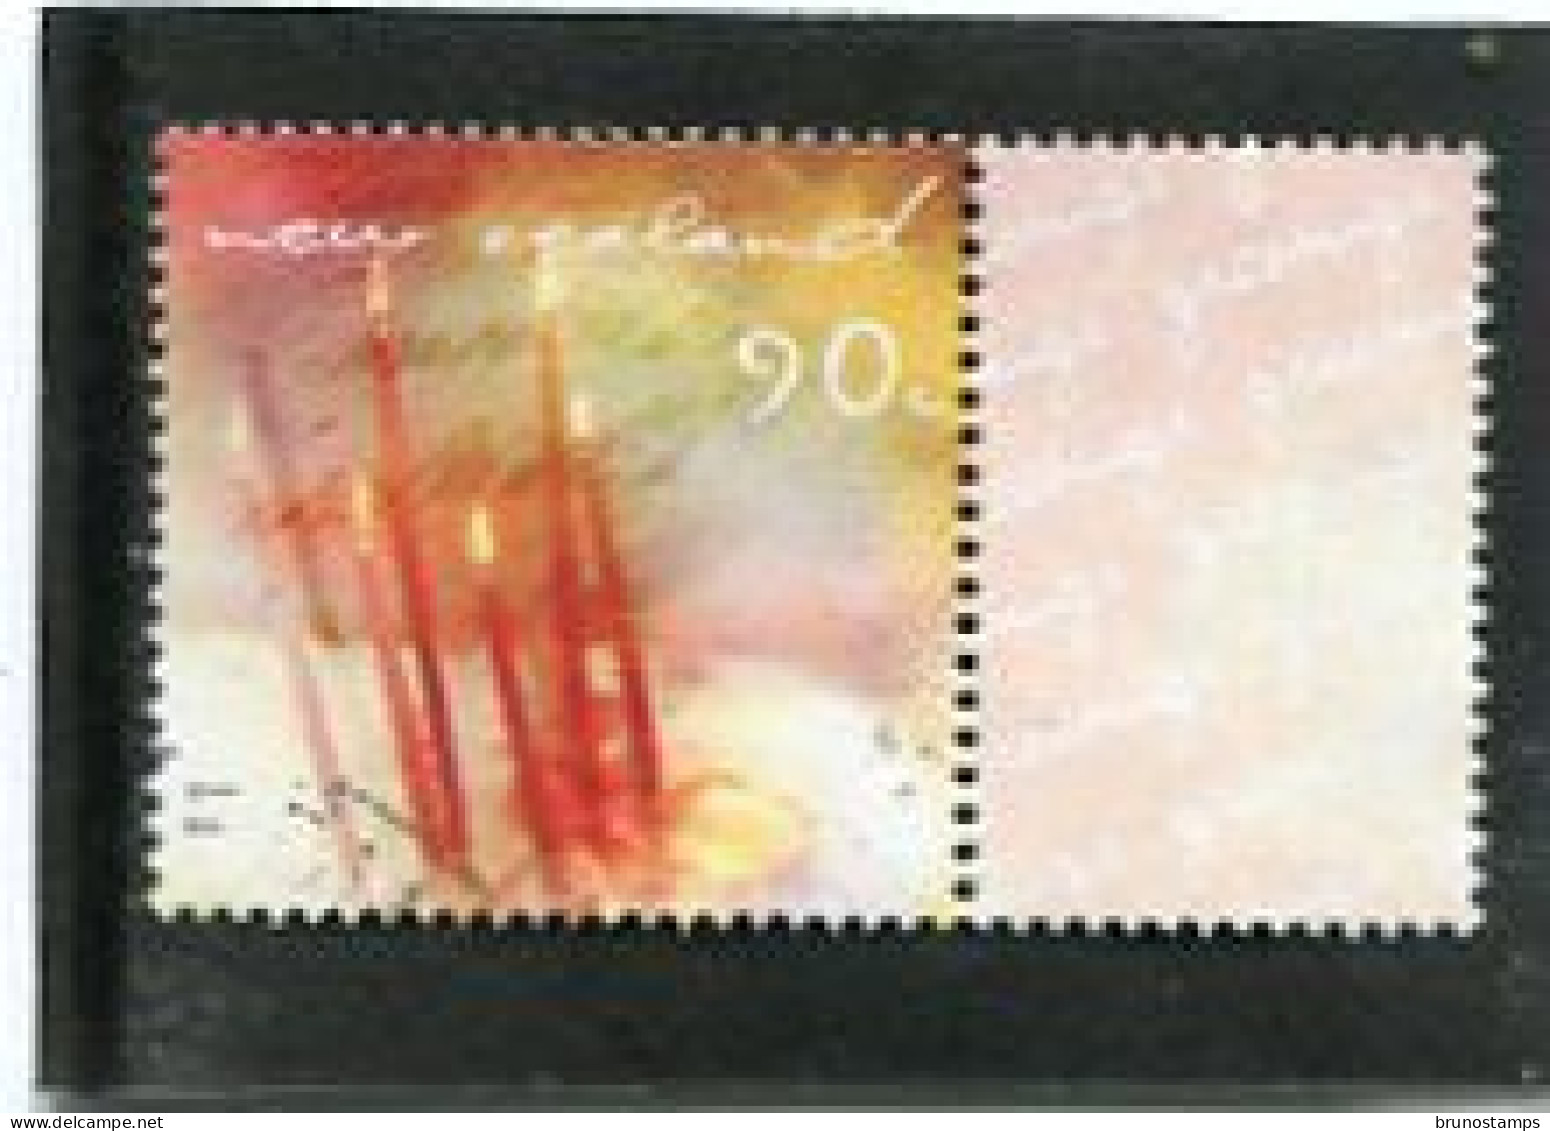 NEW ZEALAND - 2001  90c  GREETINGS  CANDLES  FINE  USED - Used Stamps